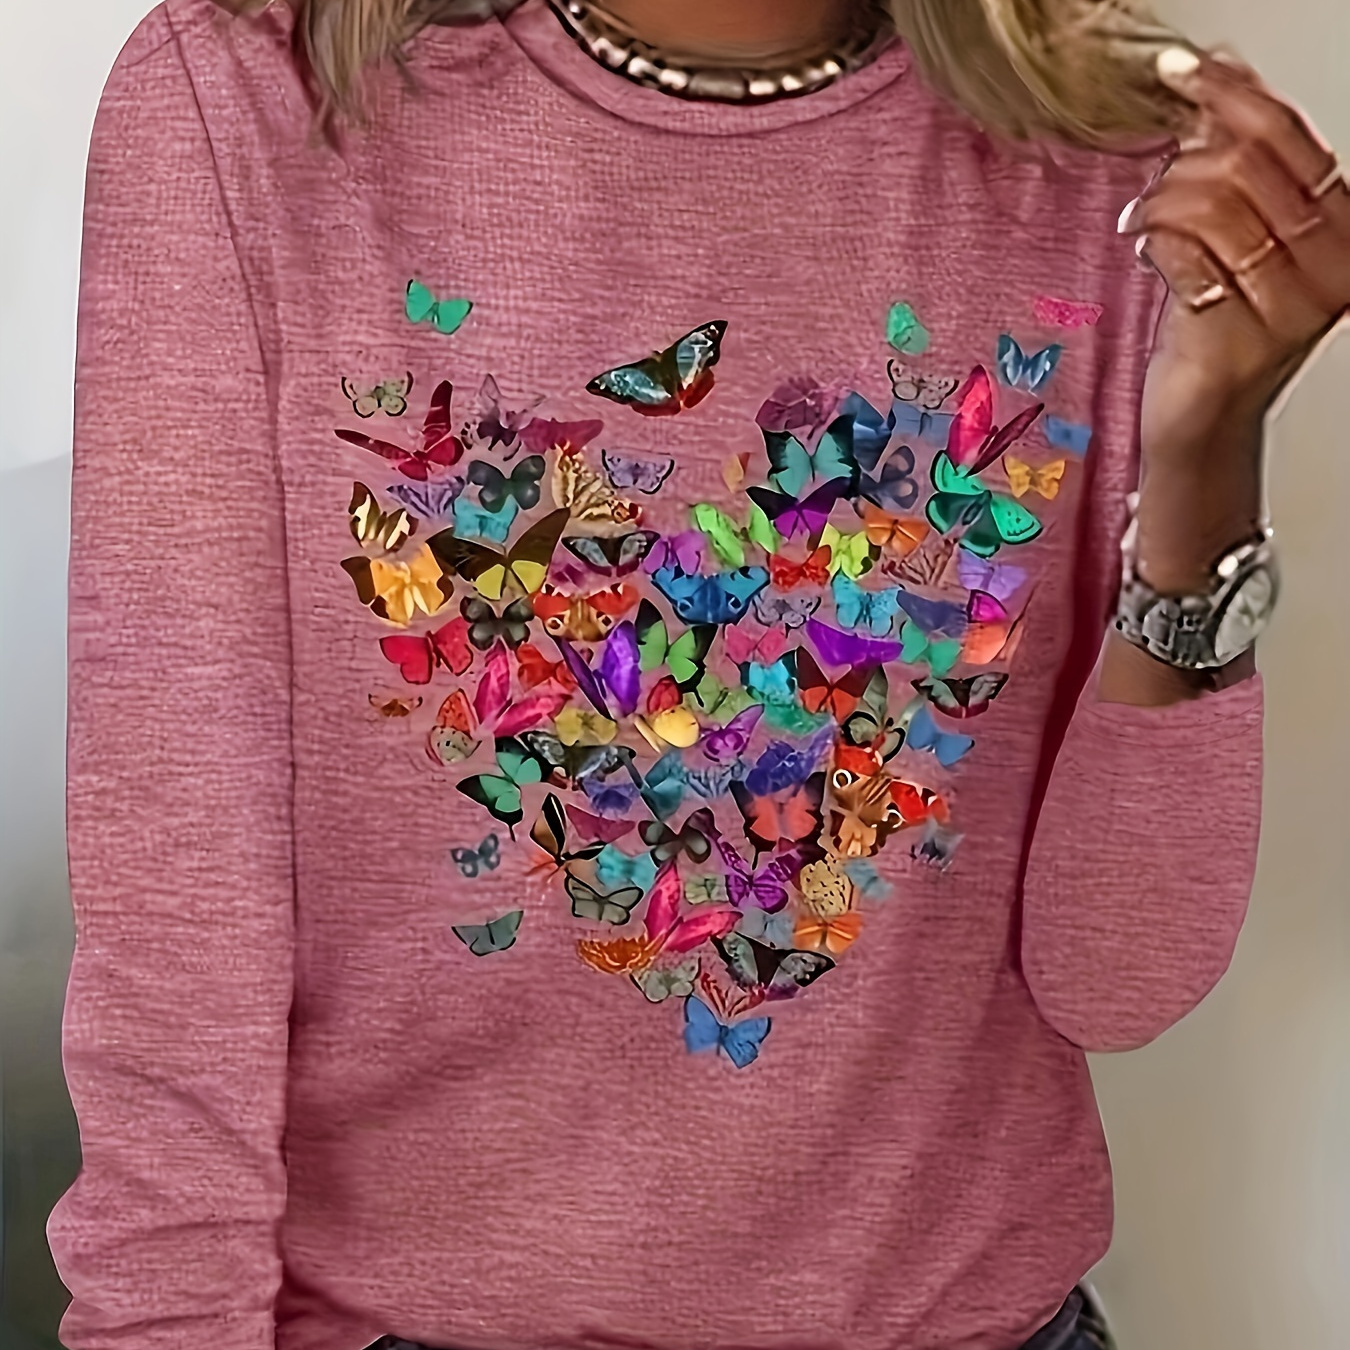 

Butterfly Print Crew Neck T-shirt, Casual Long Sleeve T-shirt For Spring & Fall, Women's Clothing